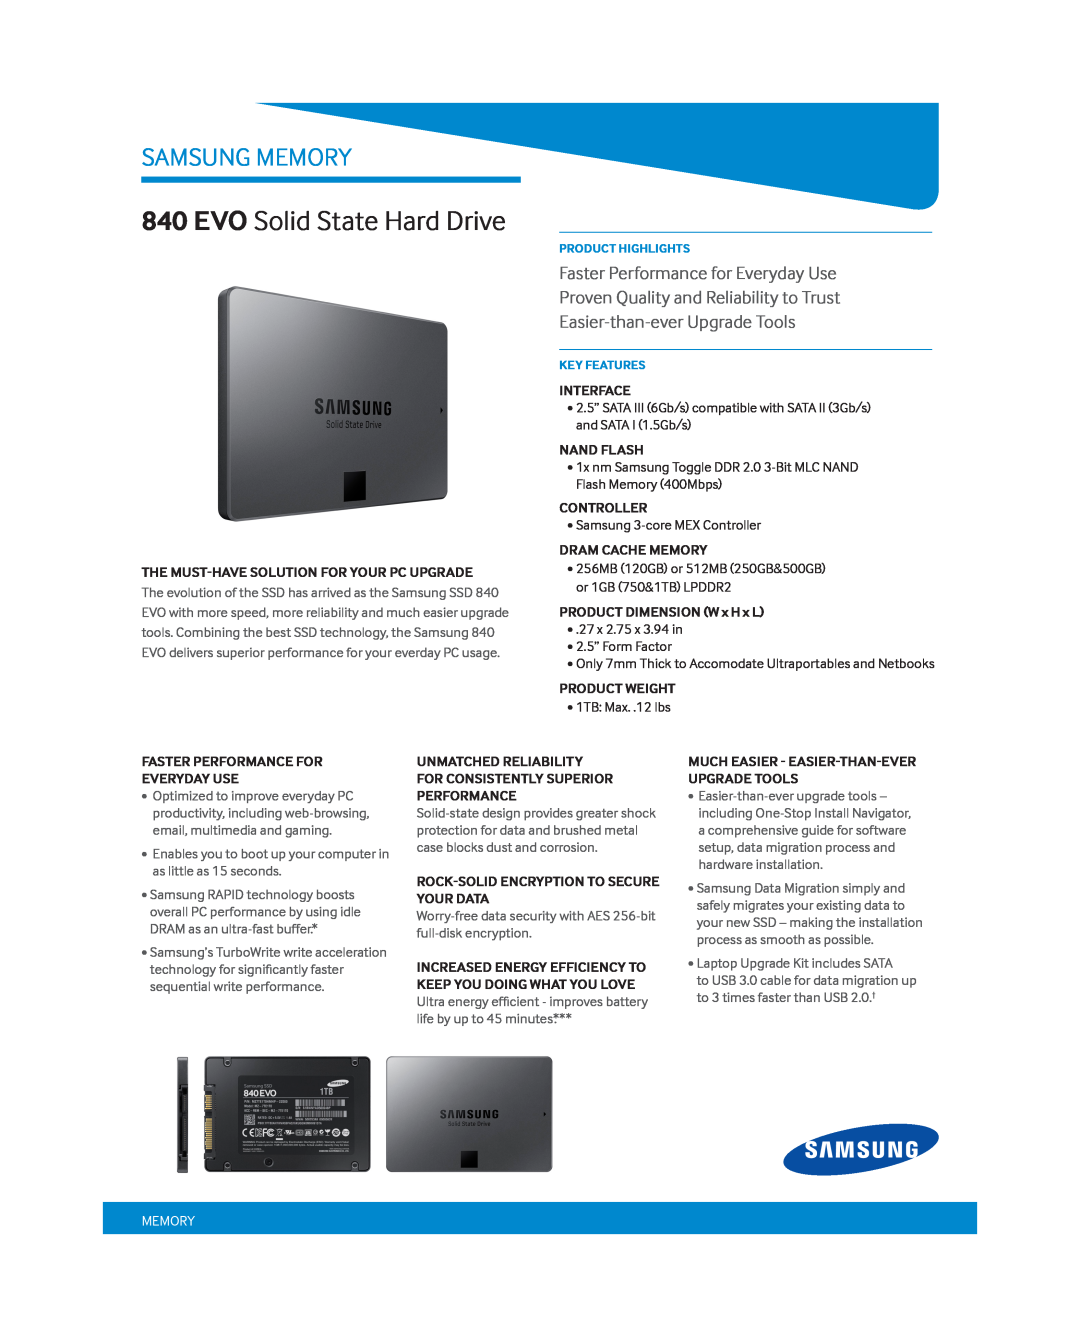 Samsung MZ7TE120KW, MZ7TE250BW manual EVO Solid State Hard Drive, Samsung Memory, Faster Performance for Everyday Use 